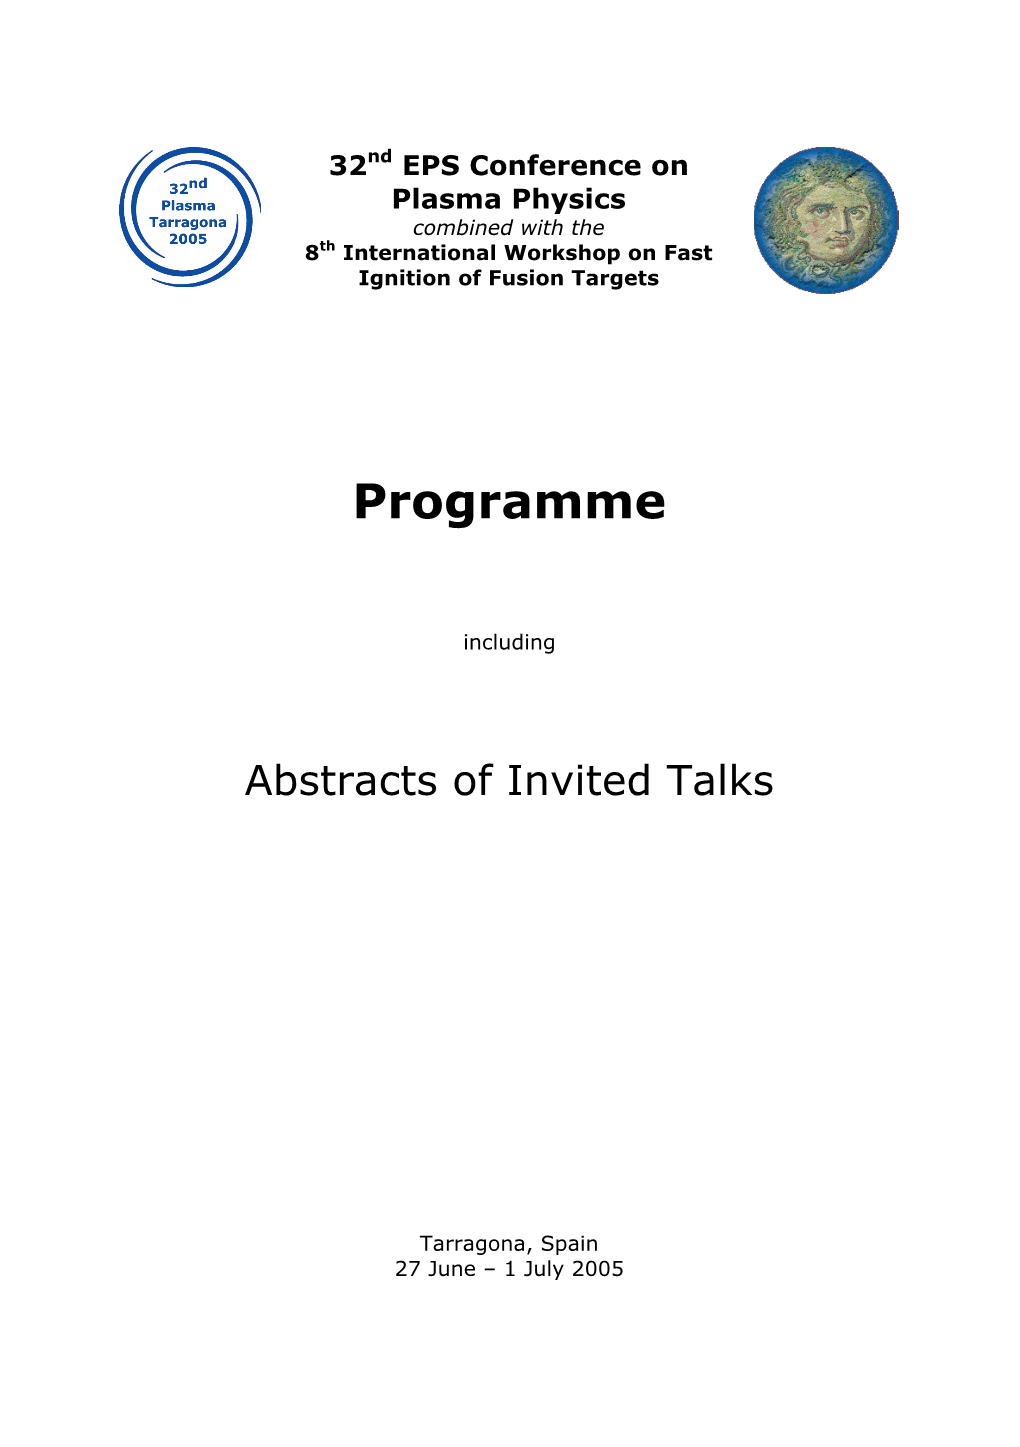 Programme and Abstracts of Invited Talks